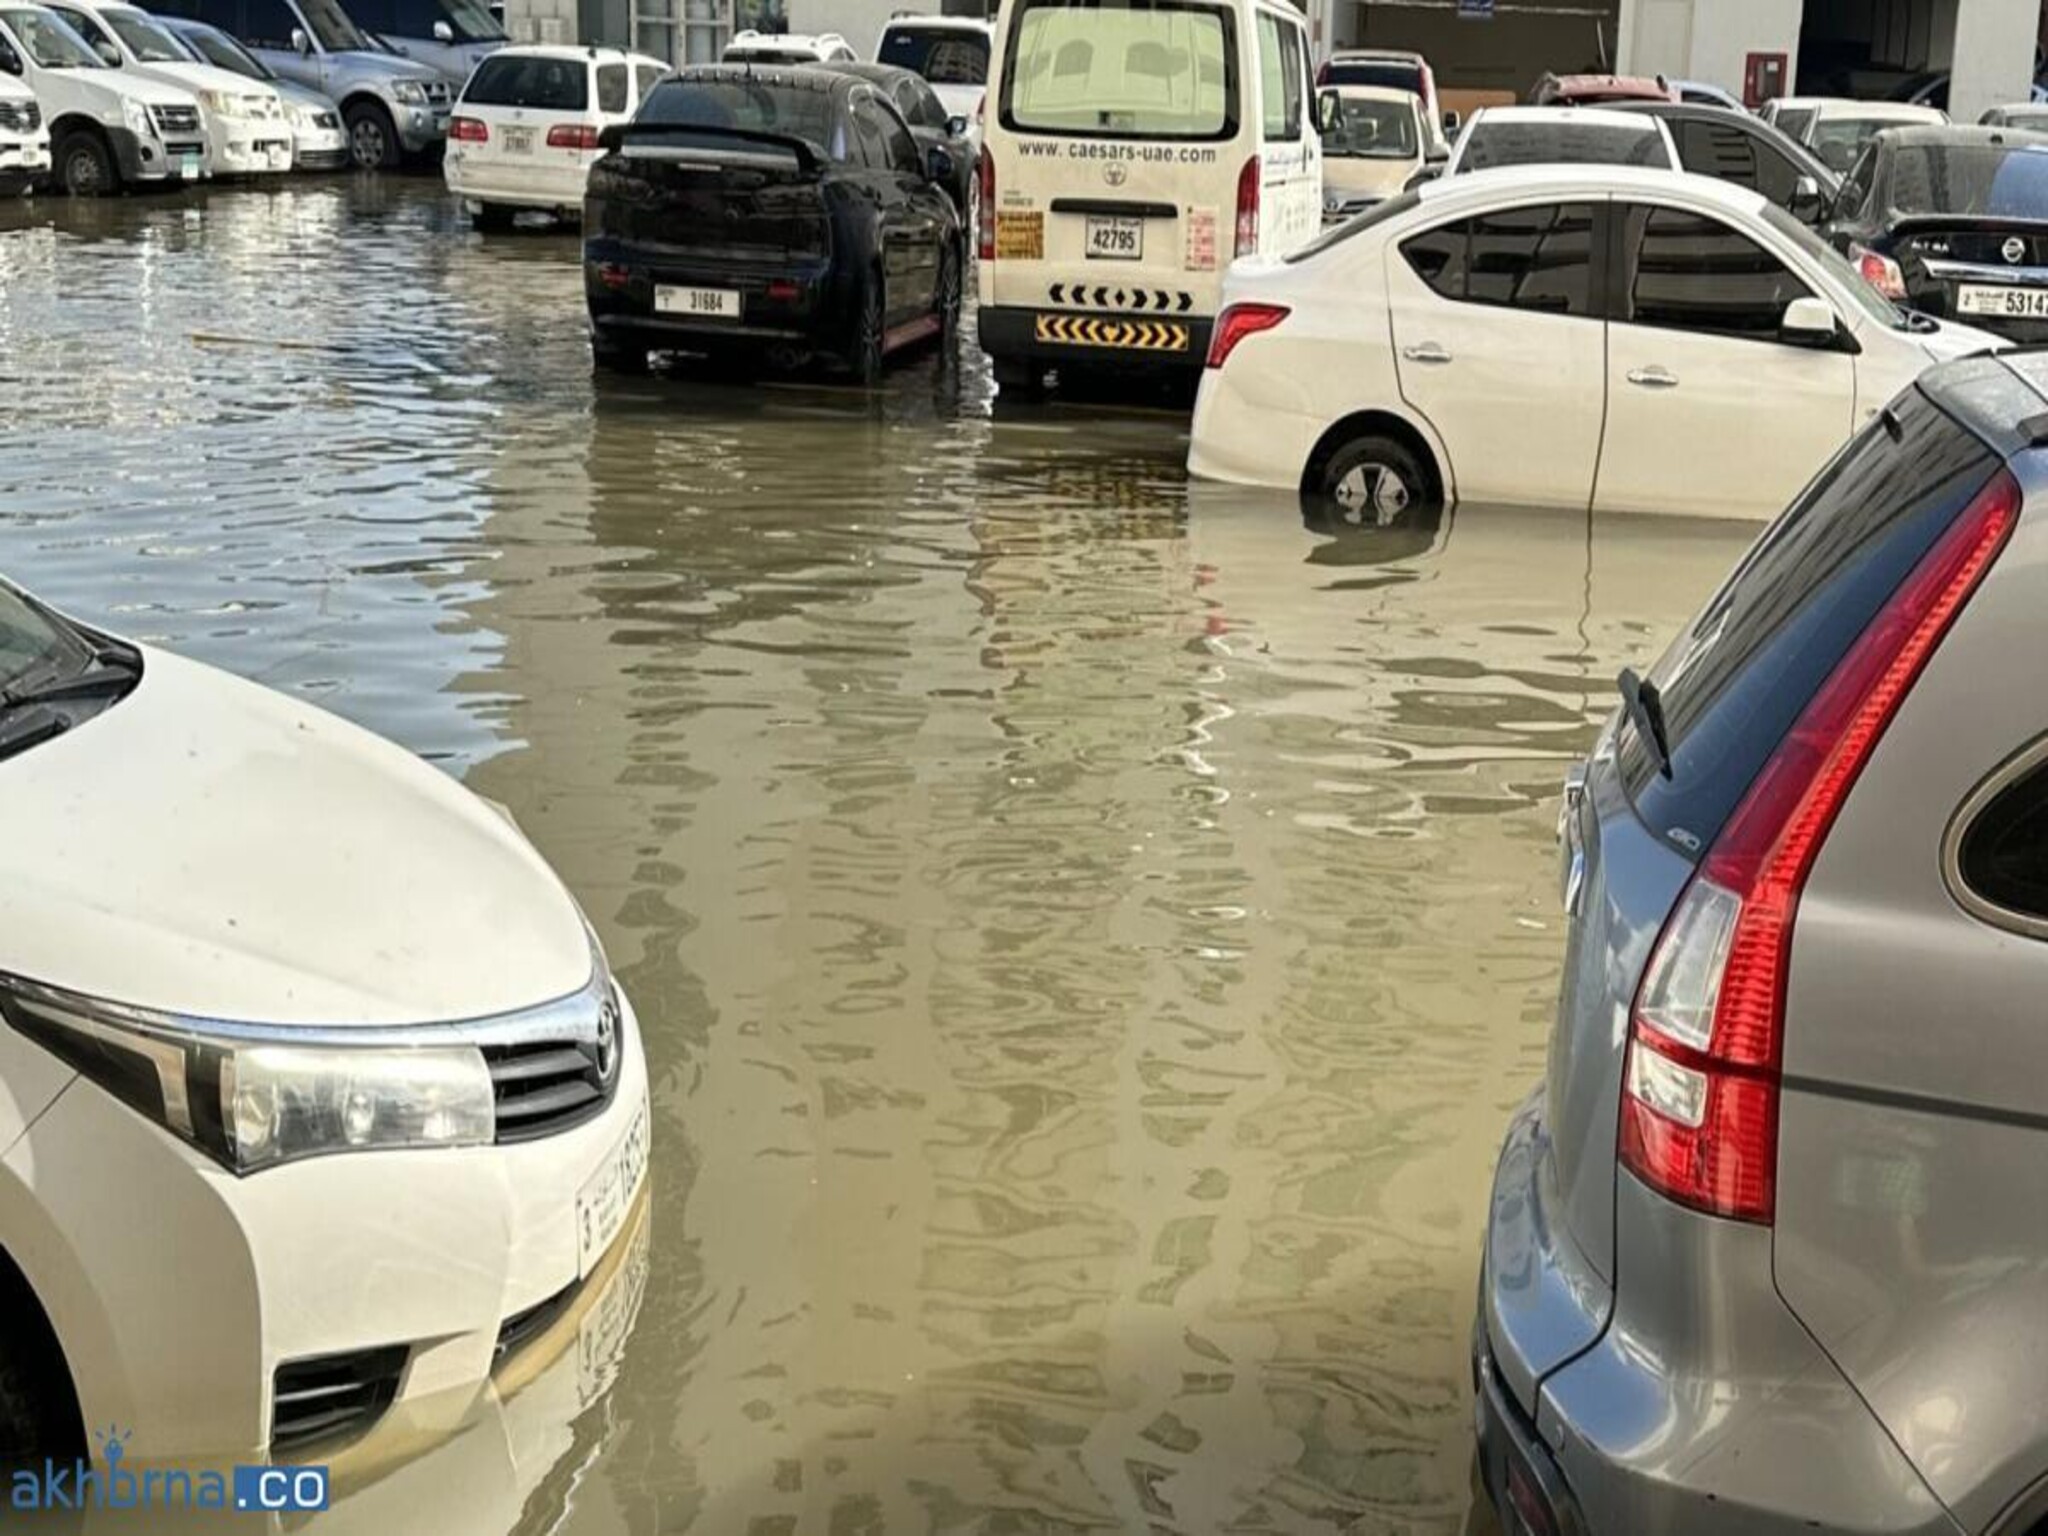 UAE: Work-from-Home Extended as Vehicles Remain Submerged in Flooded Parking Lot